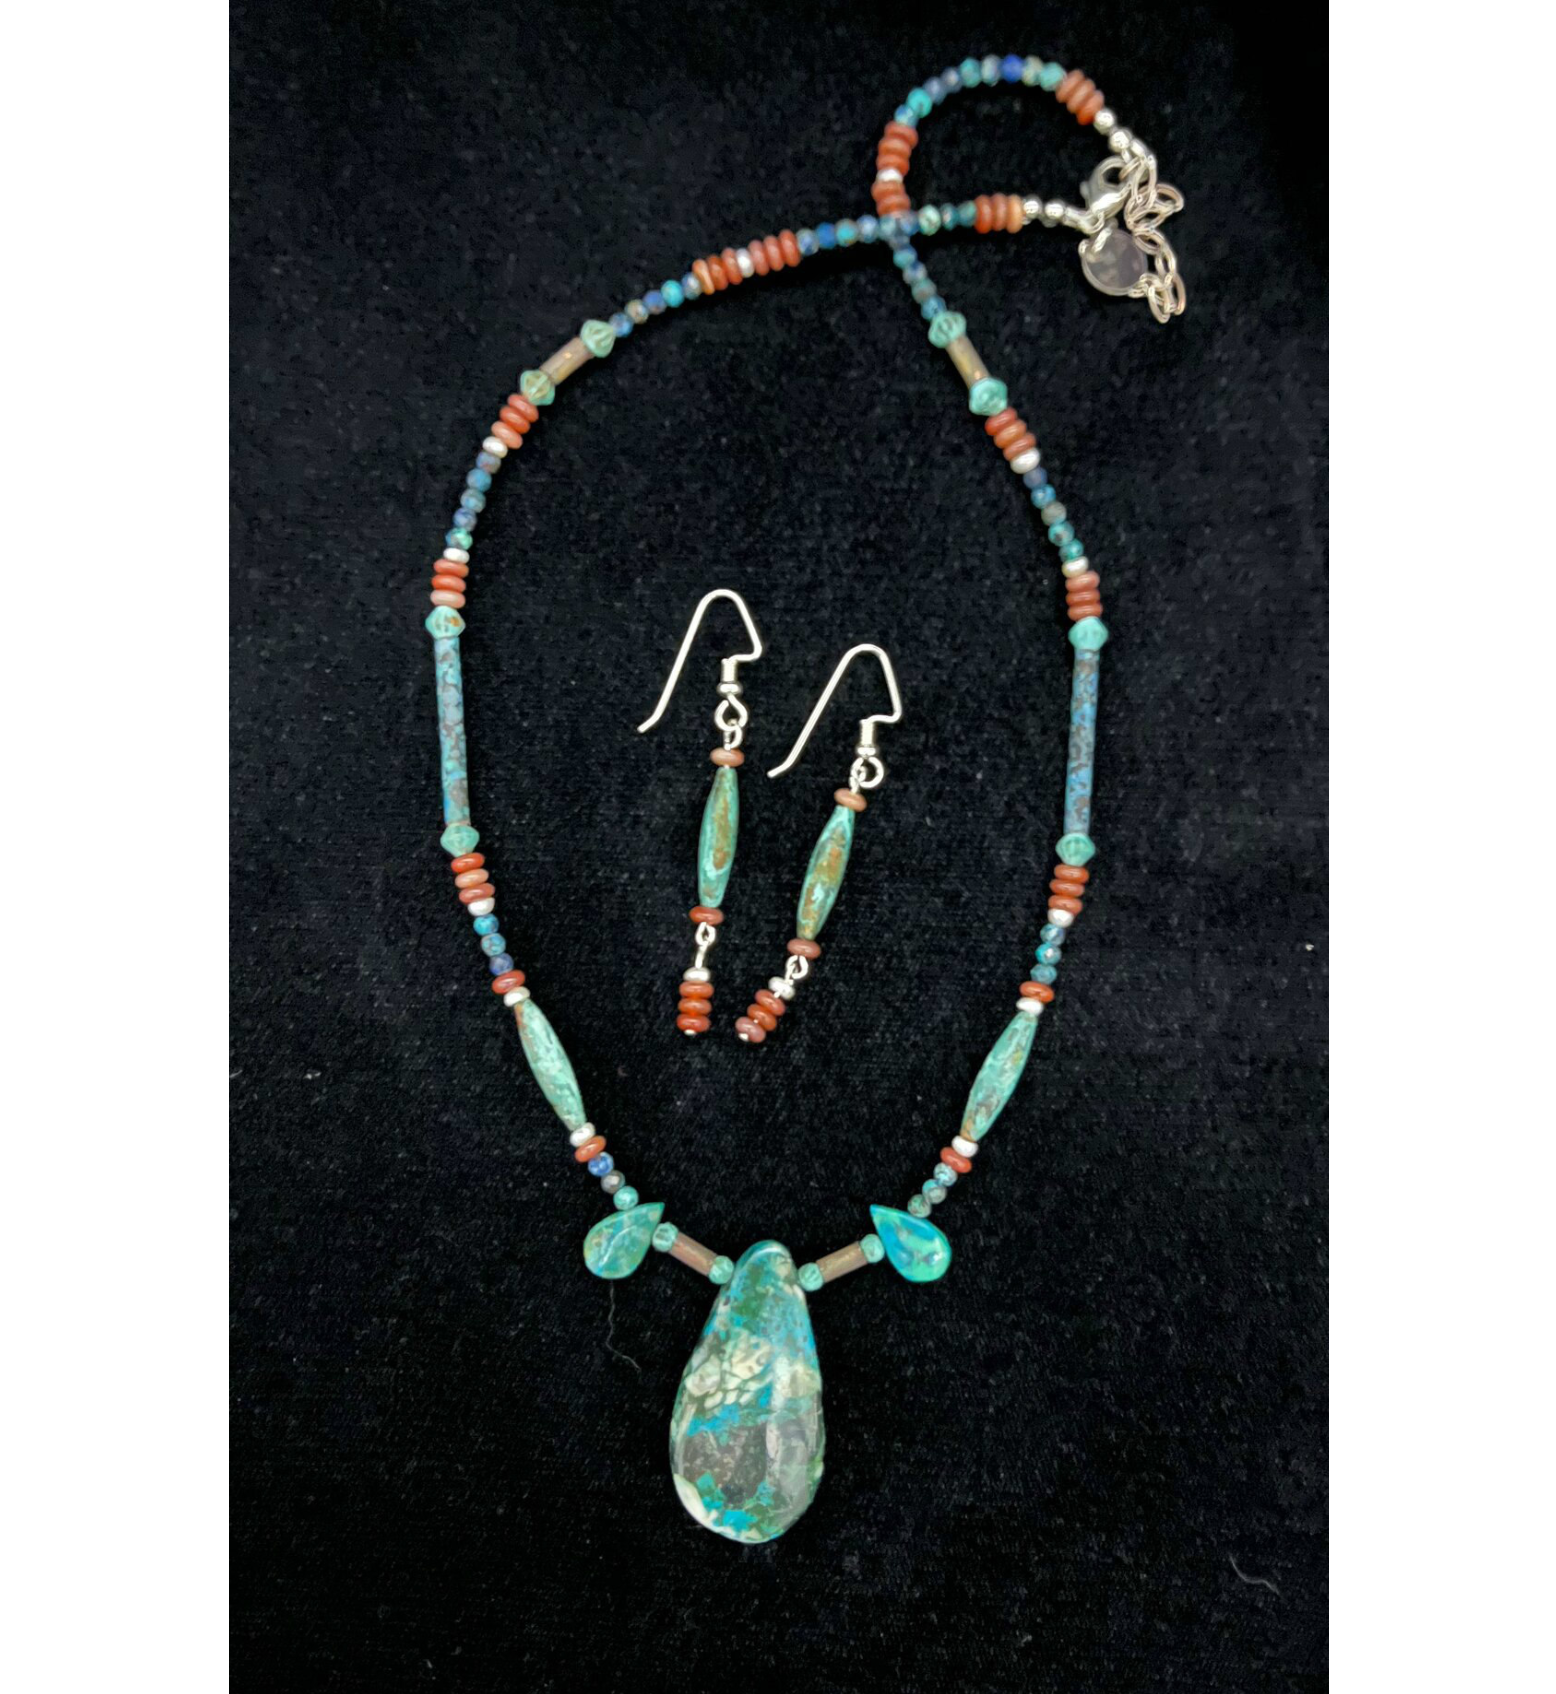  Laura Weber and Tracie Carpenter - Jewelry 